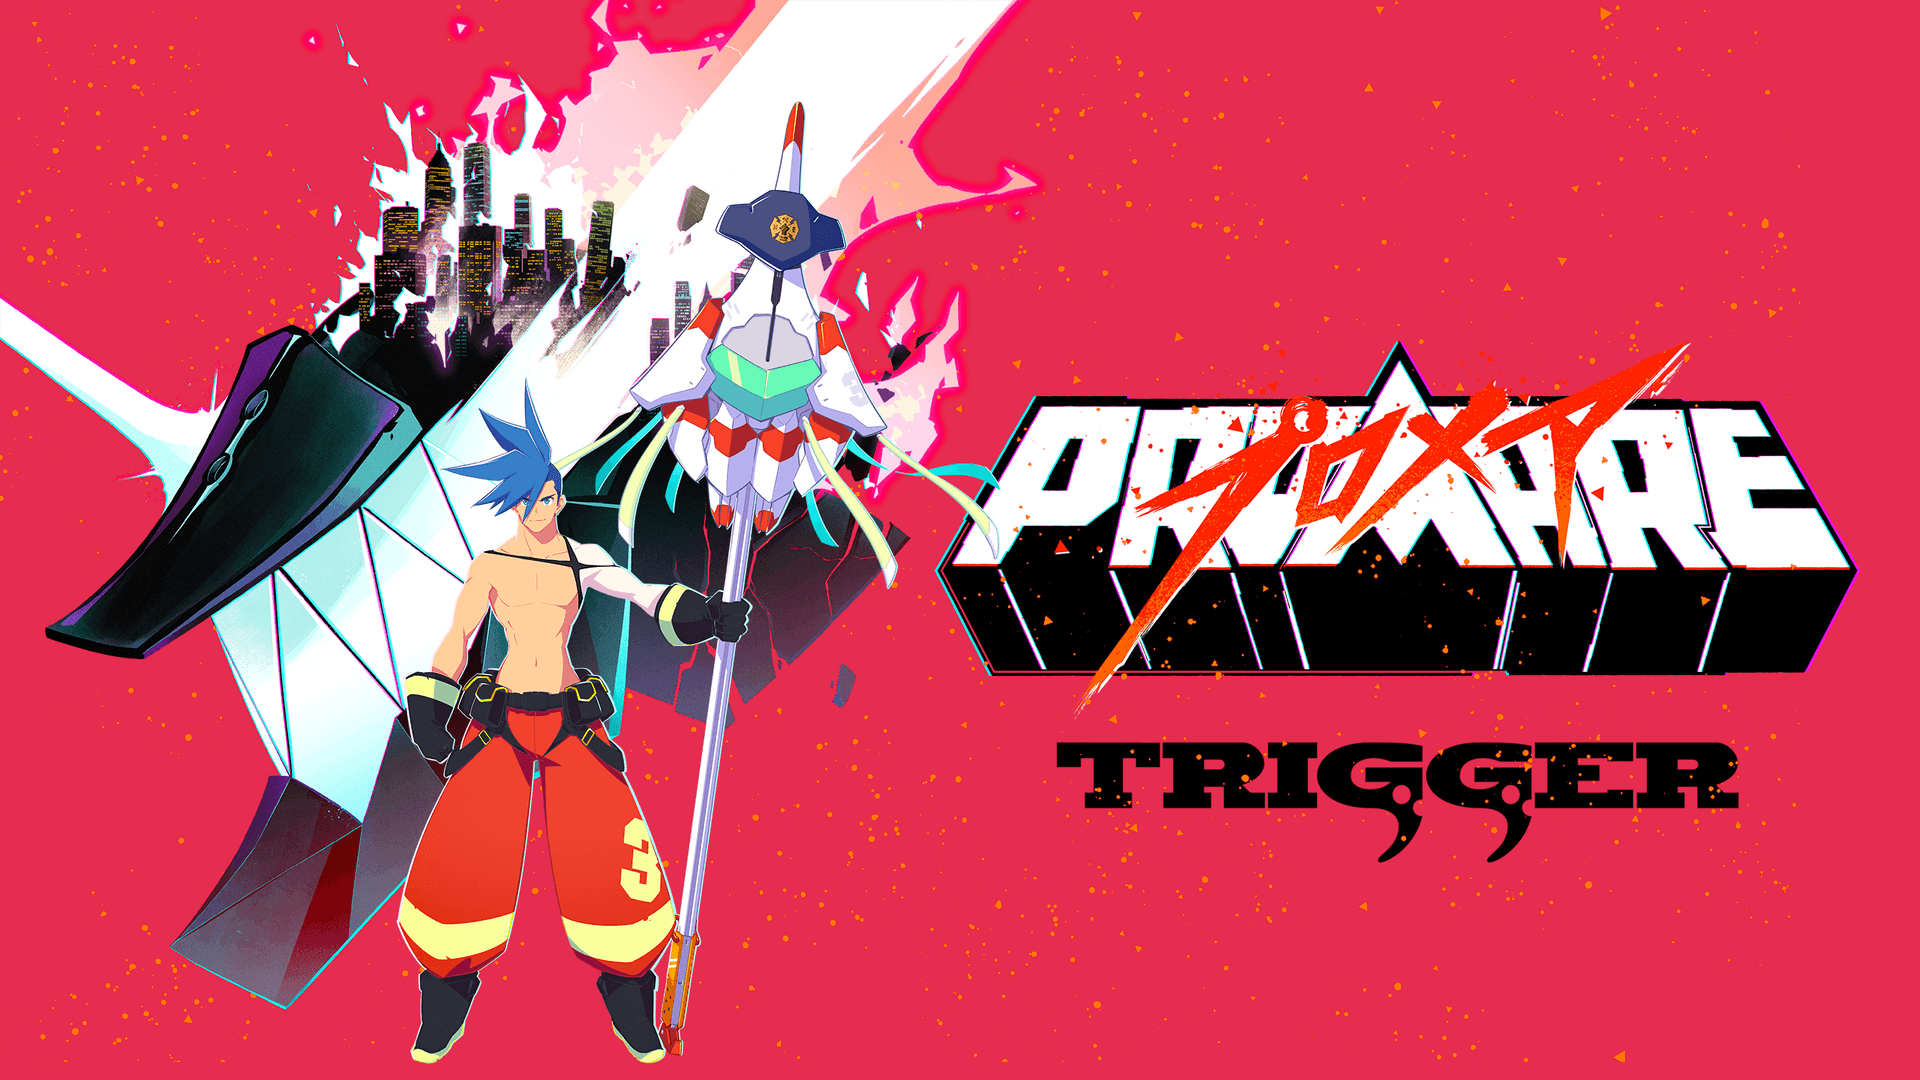 “Enjoy the heat of the blazing flames with Promare!”